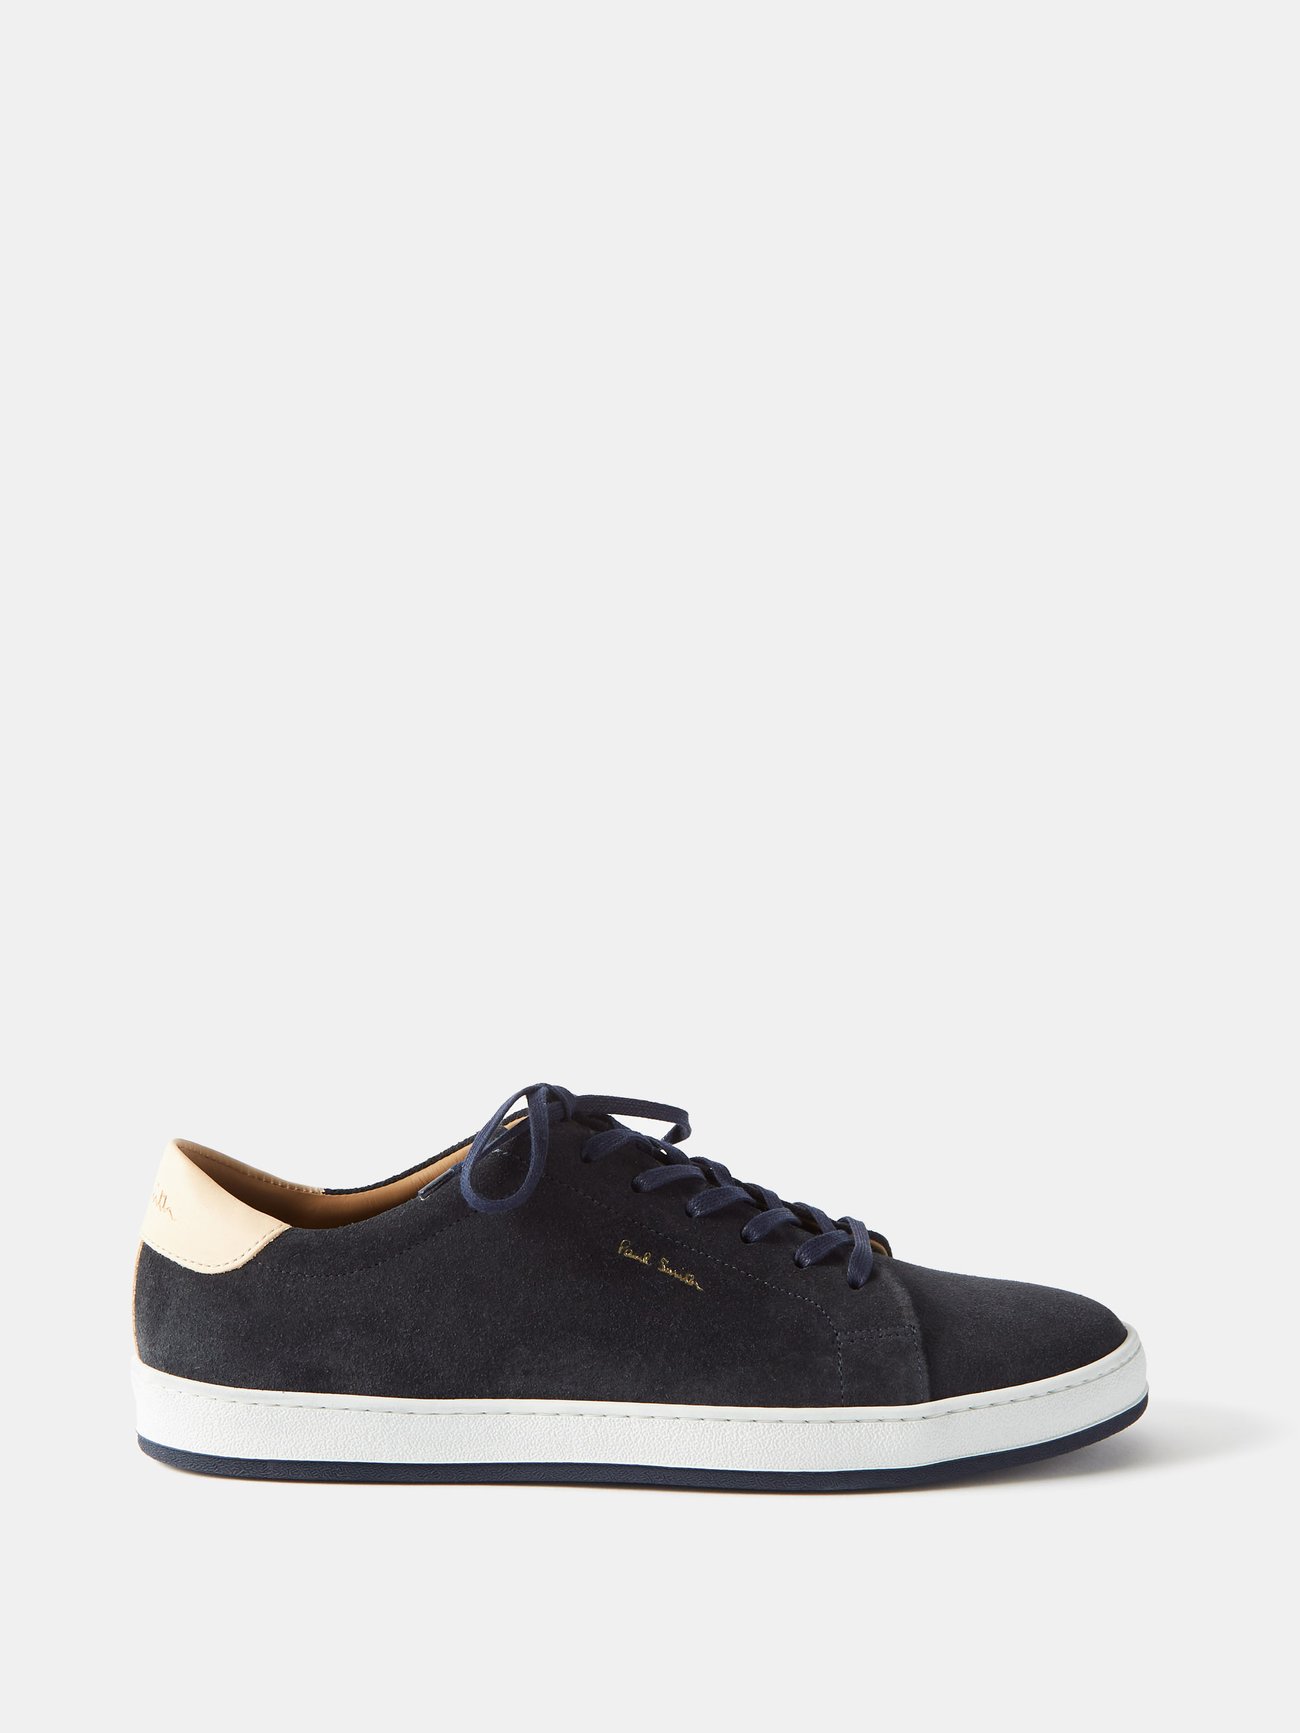 Wear out stainless Say Navy Tyrone suede trainers | Paul Smith | MATCHESFASHION US